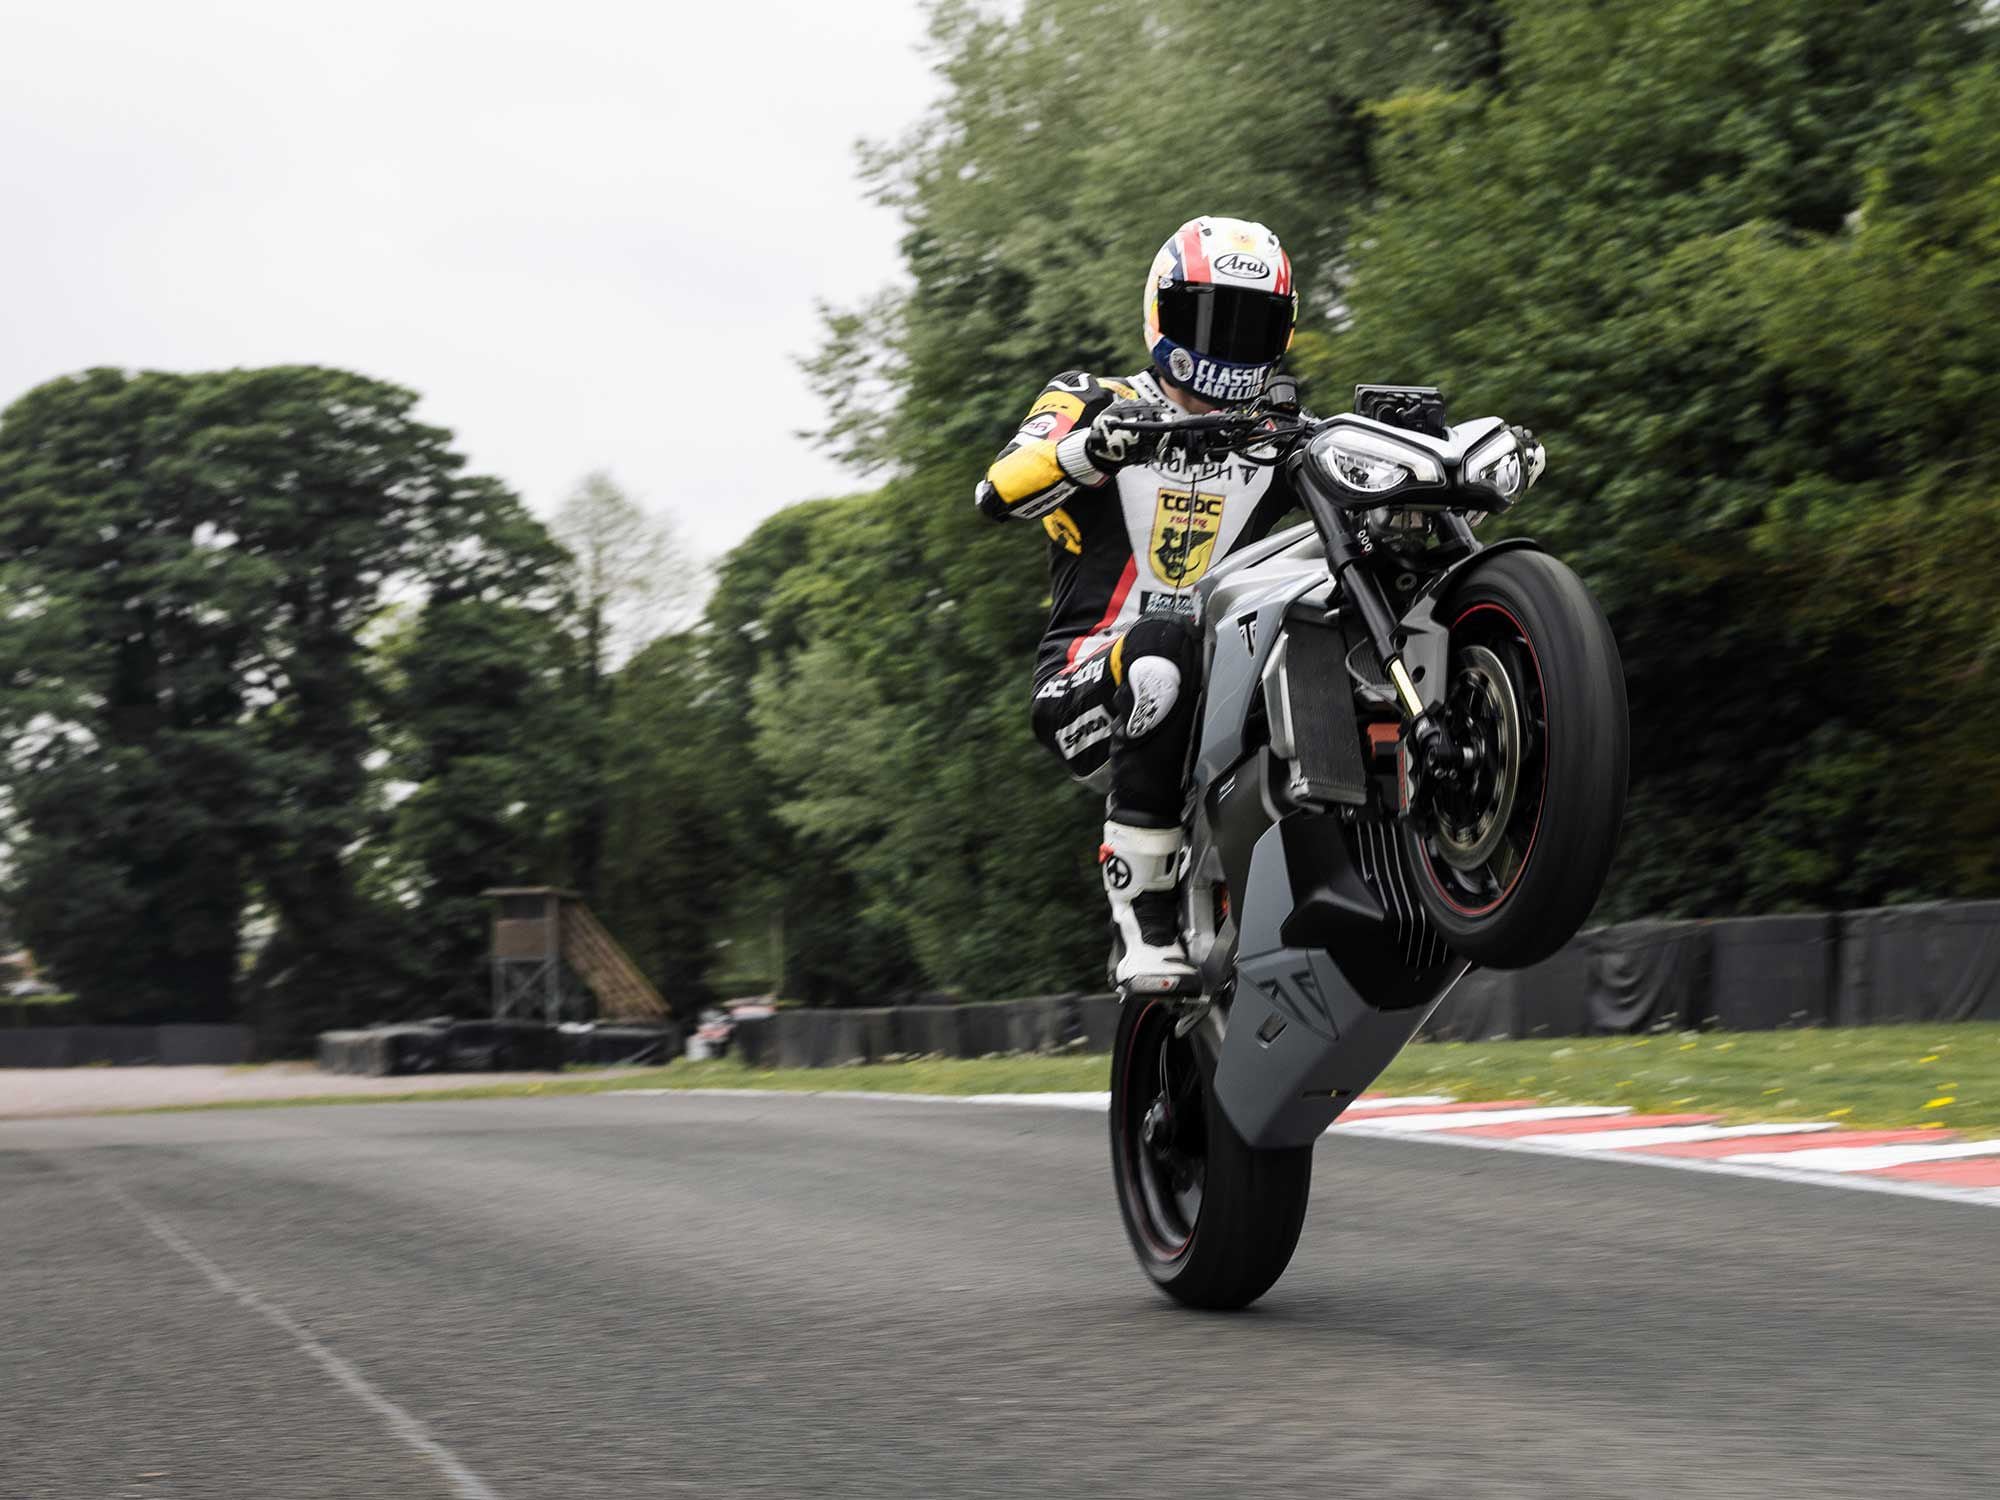 Triumph says the TE-1 is quicker than a Speed Triple 1200.